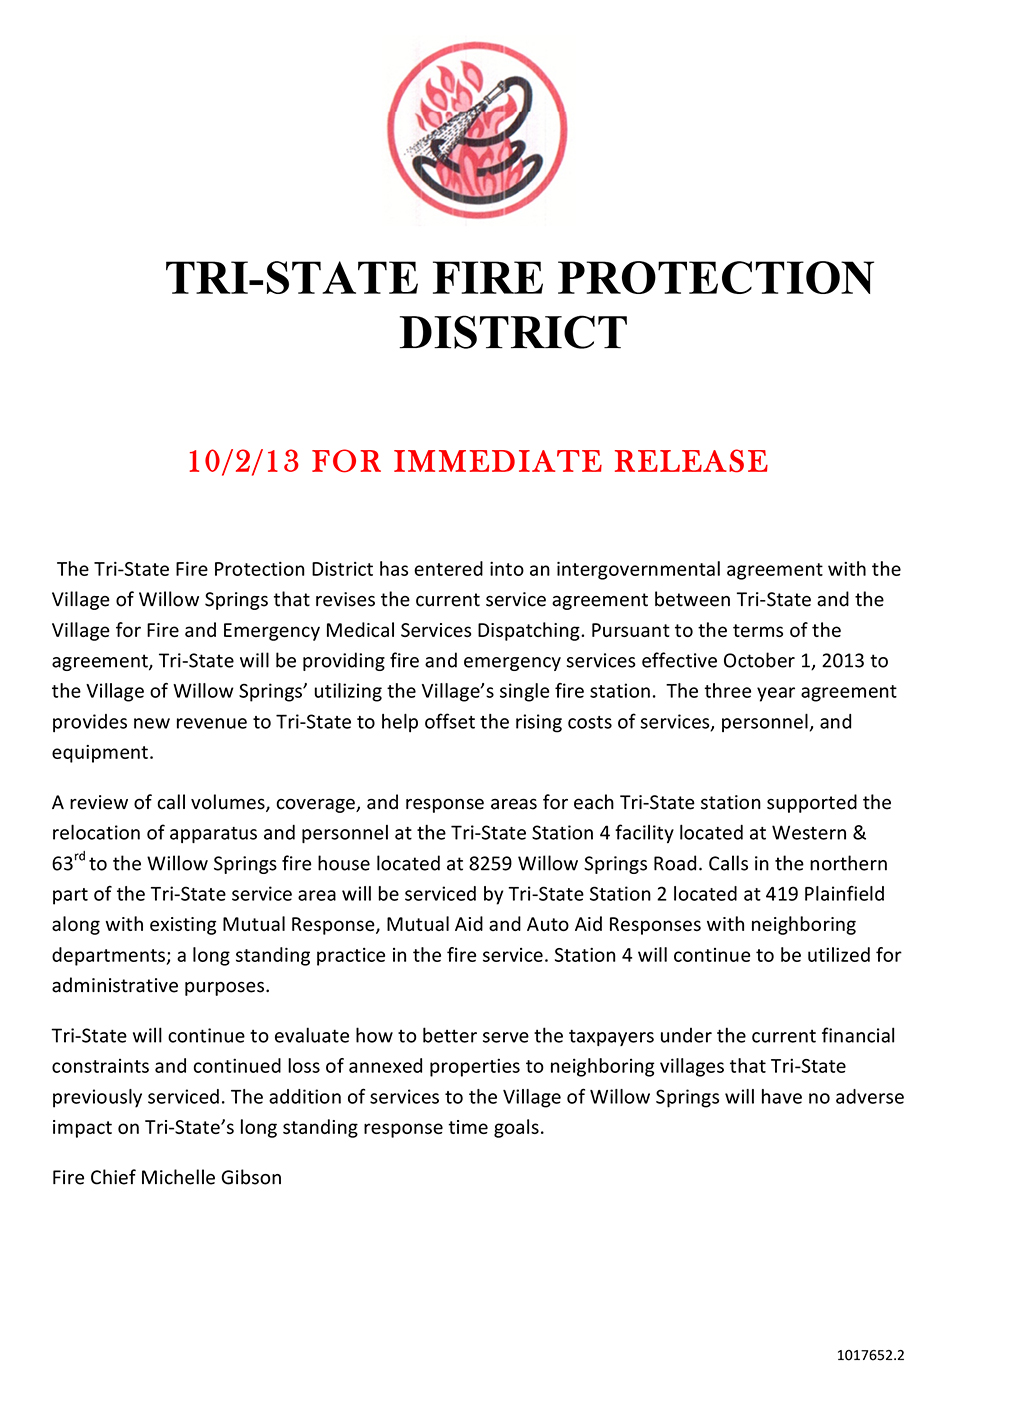 Tri-State Fire Protection District